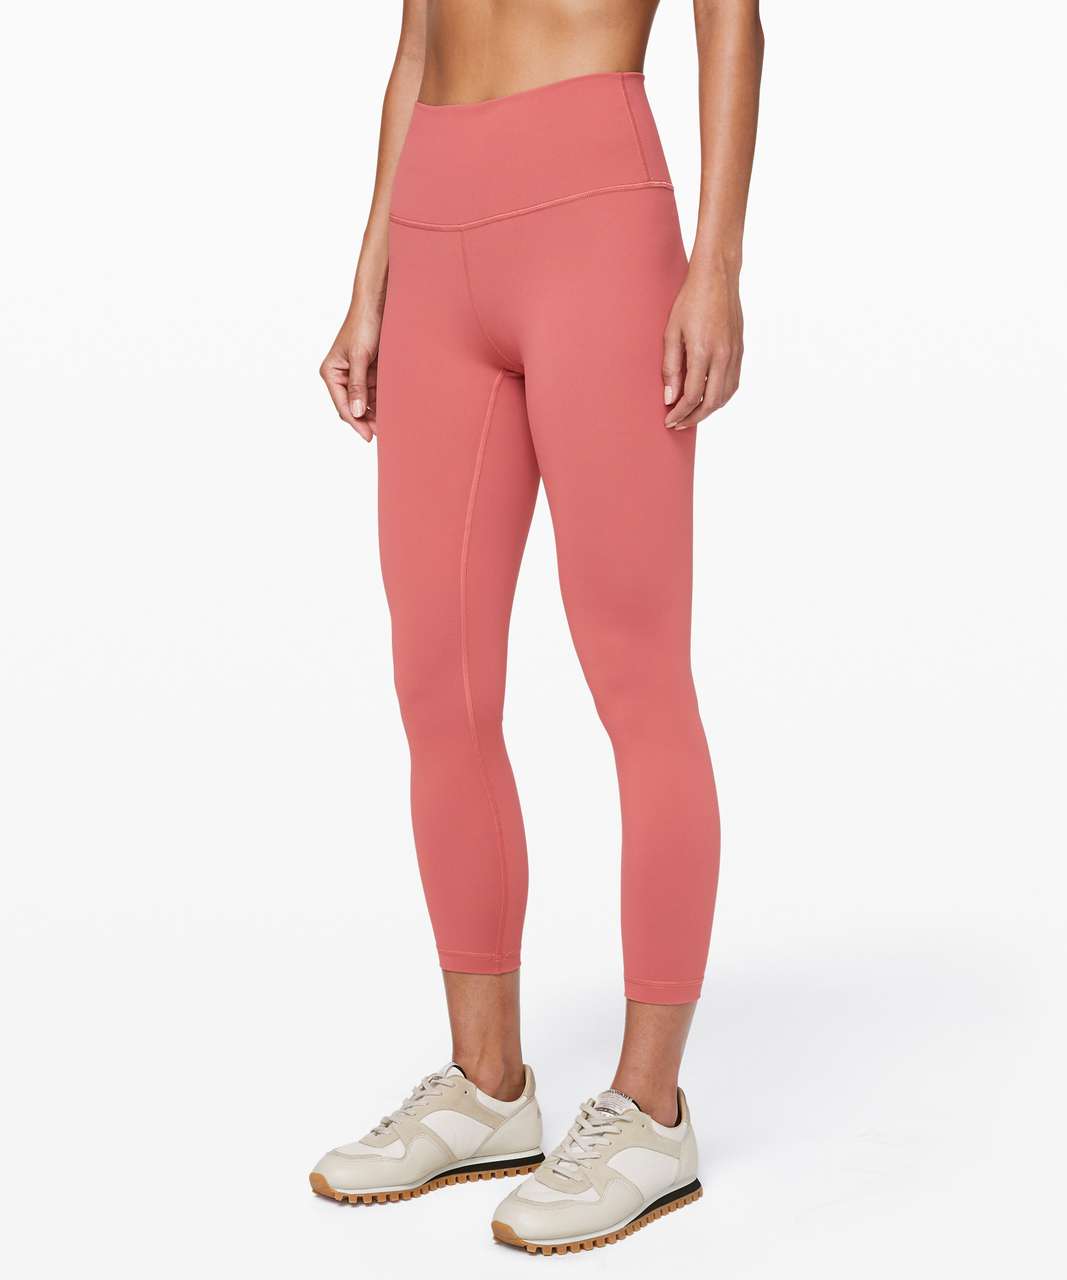 Lululemon Wunder Under High-Rise Tight 25" *Full-On Luxtreme - Rustic Coral (First Release)